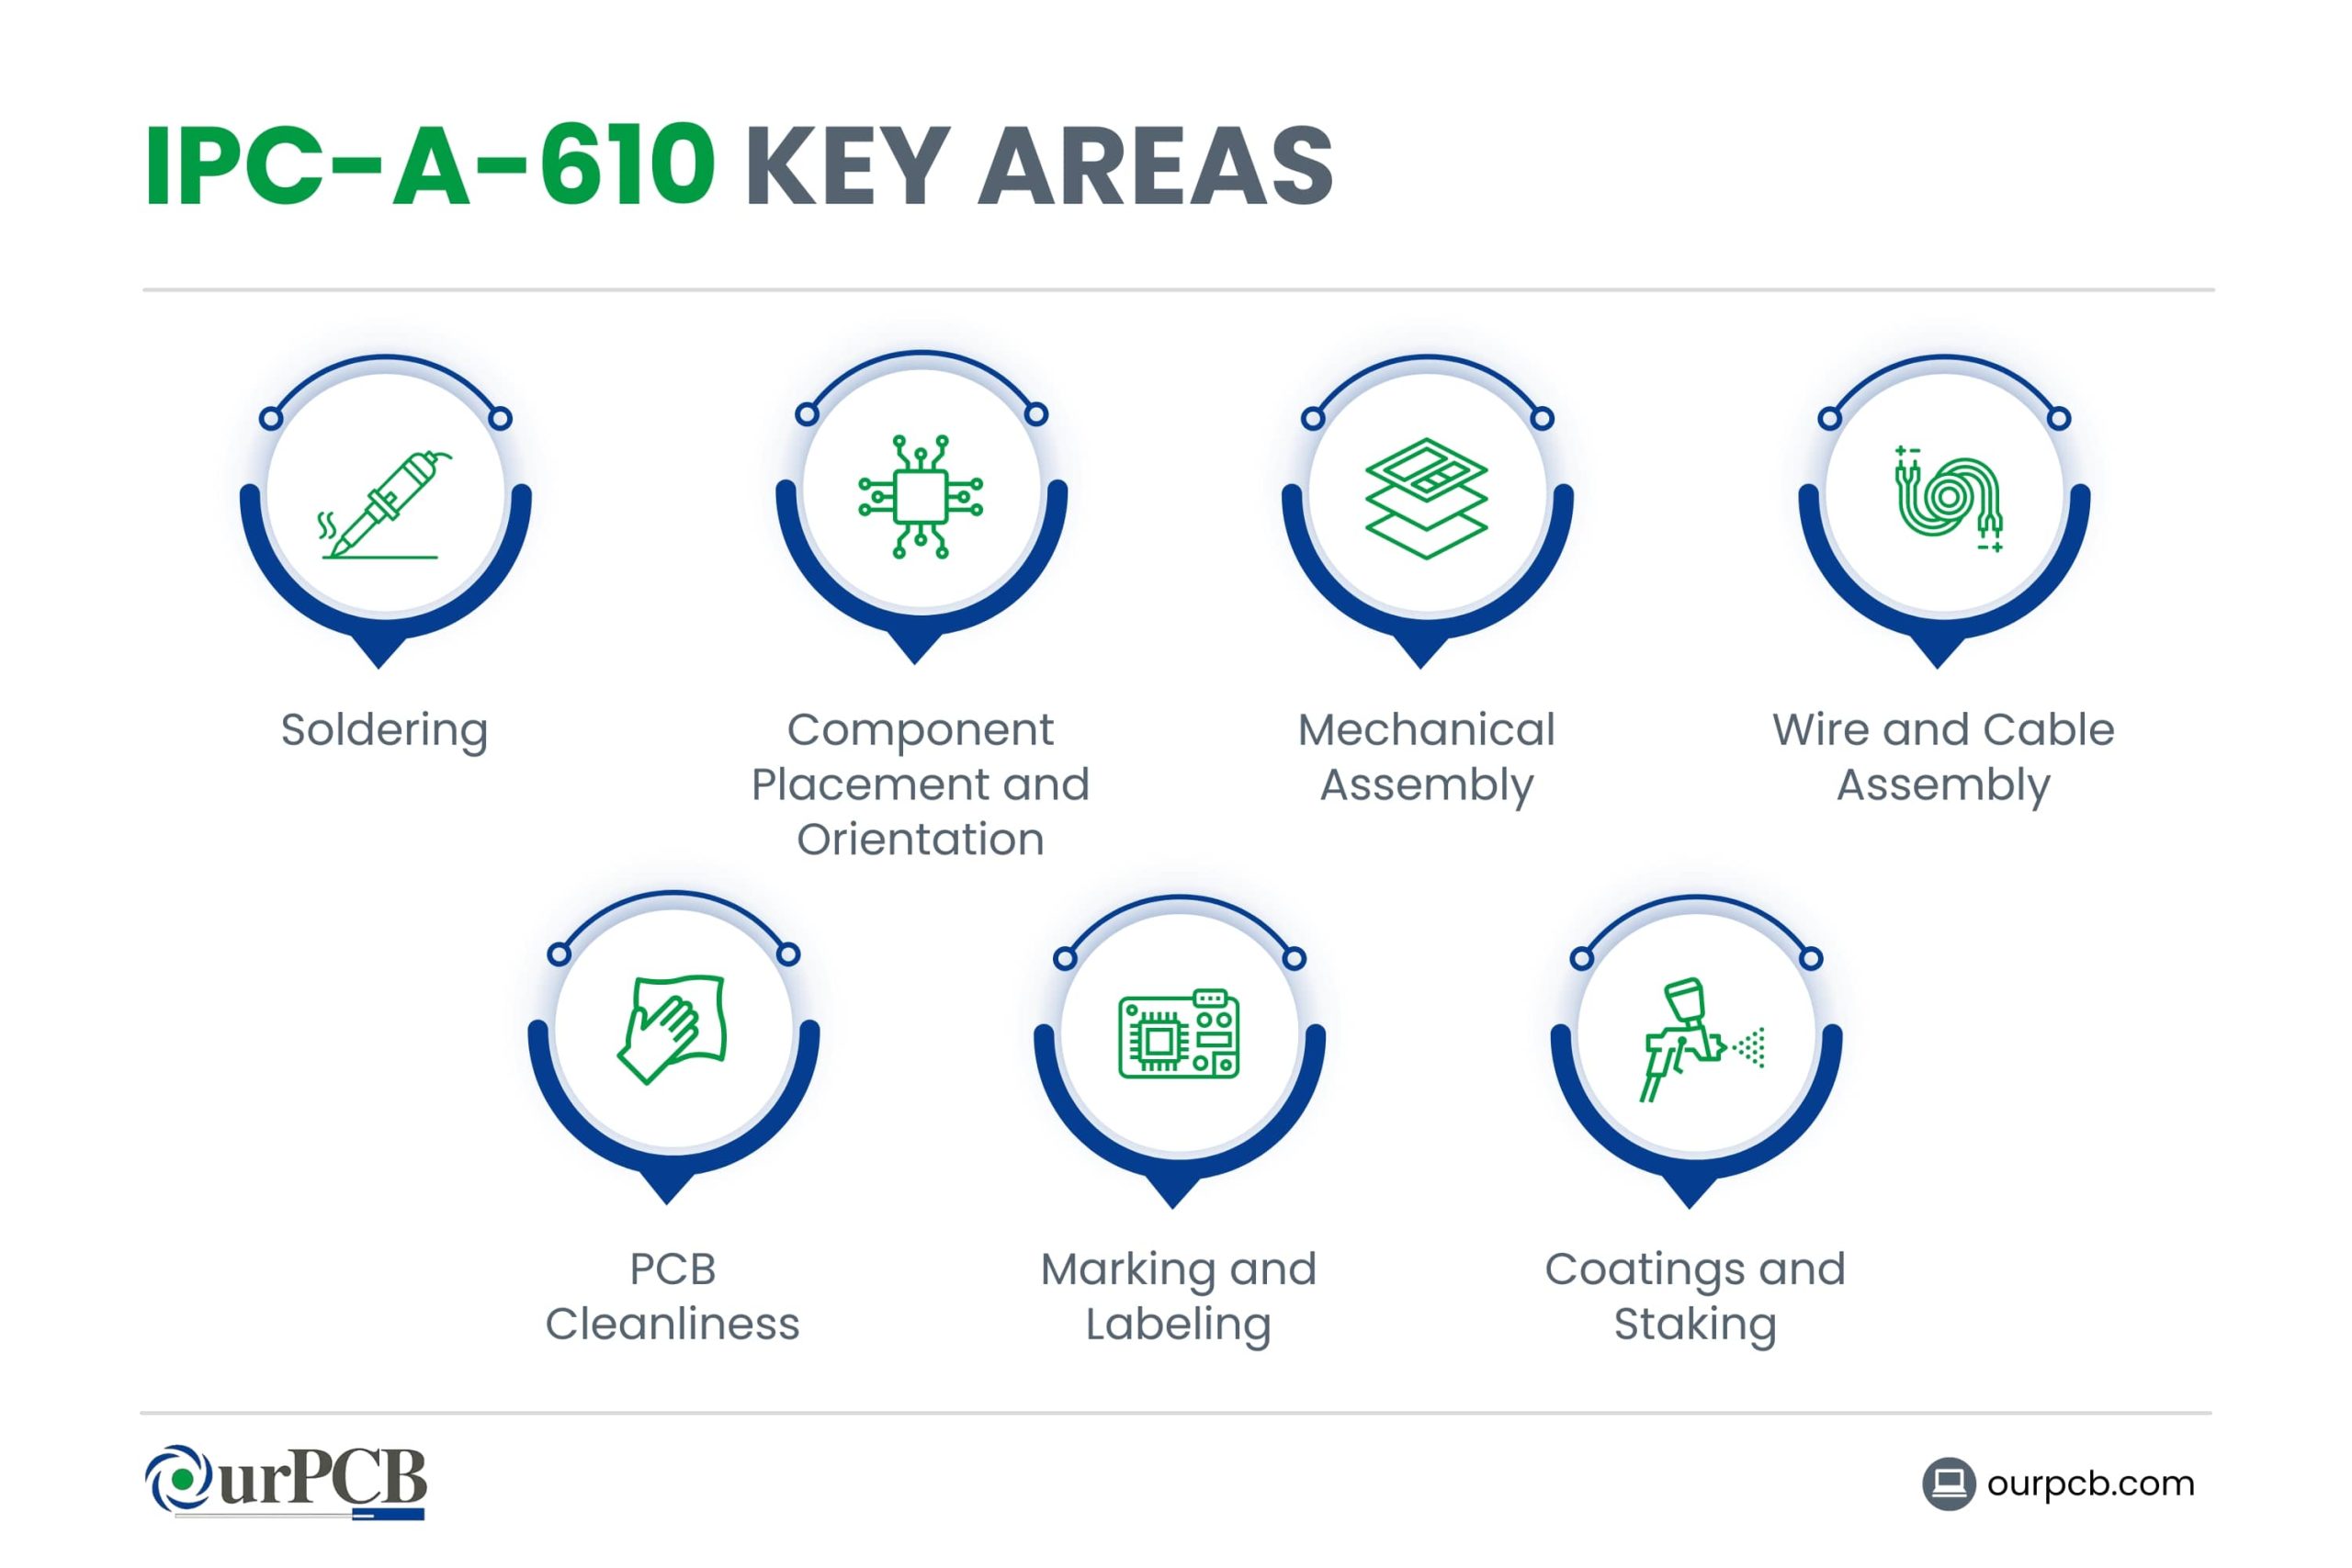 Key Areas Covered by IPC-A-610